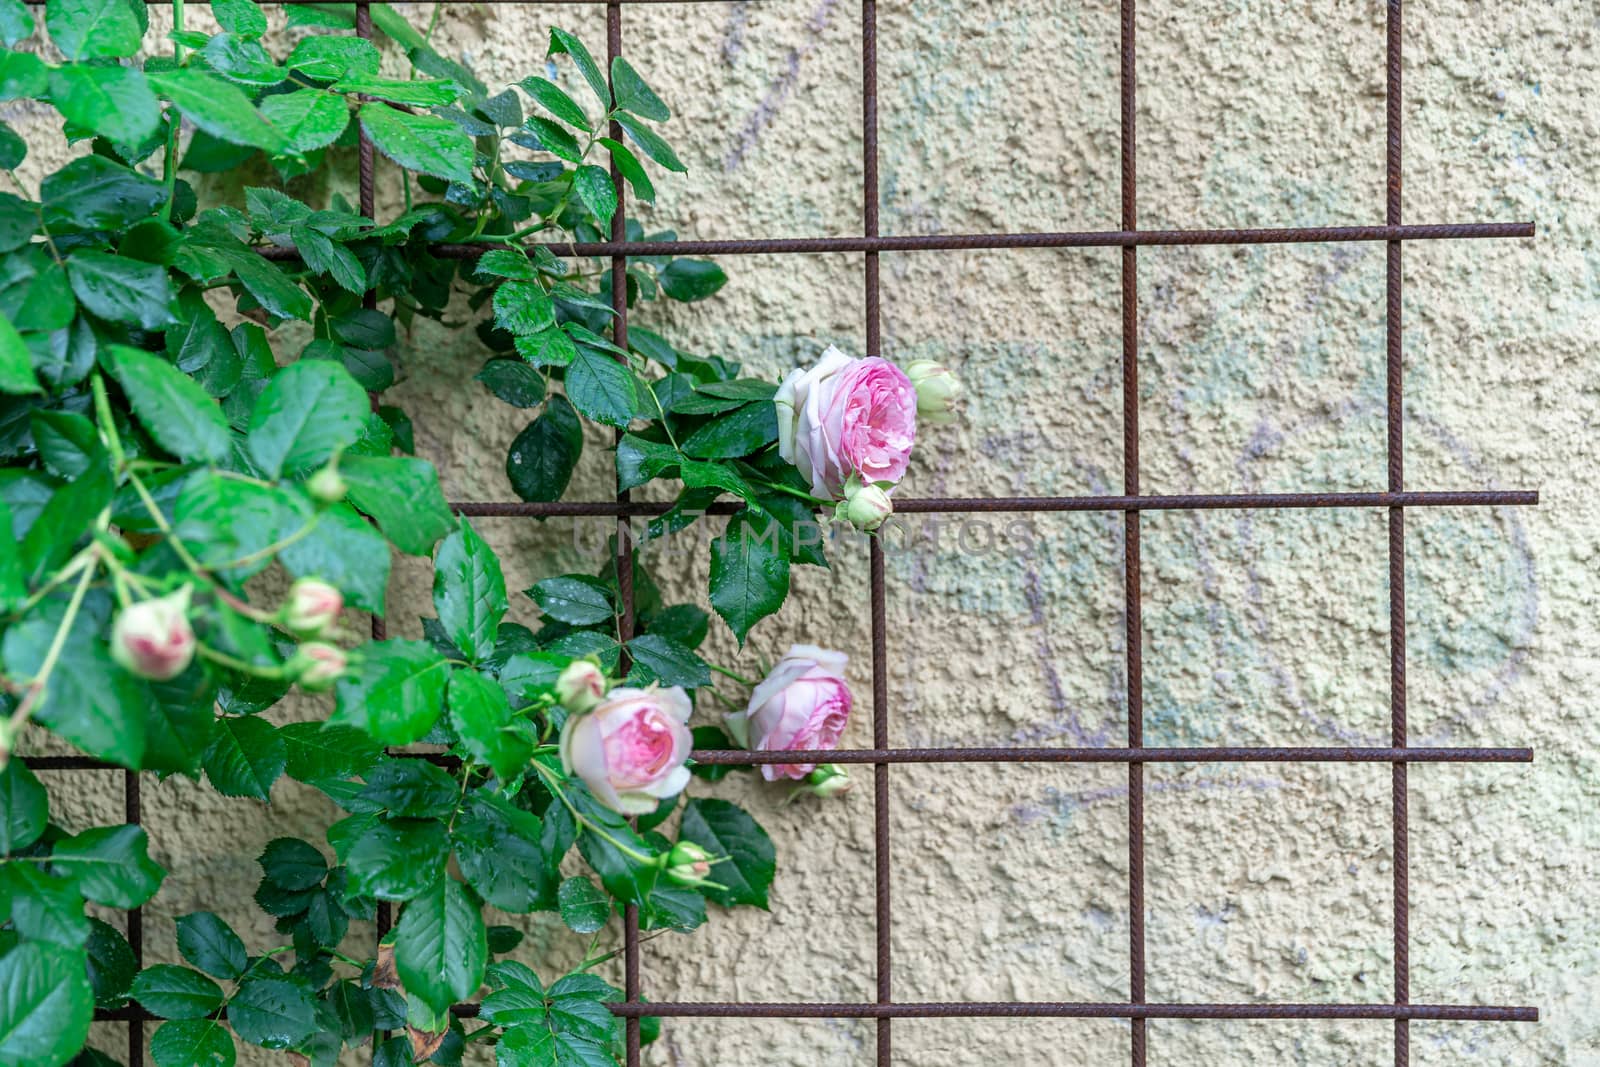 roses on a lattice near the wall of the house